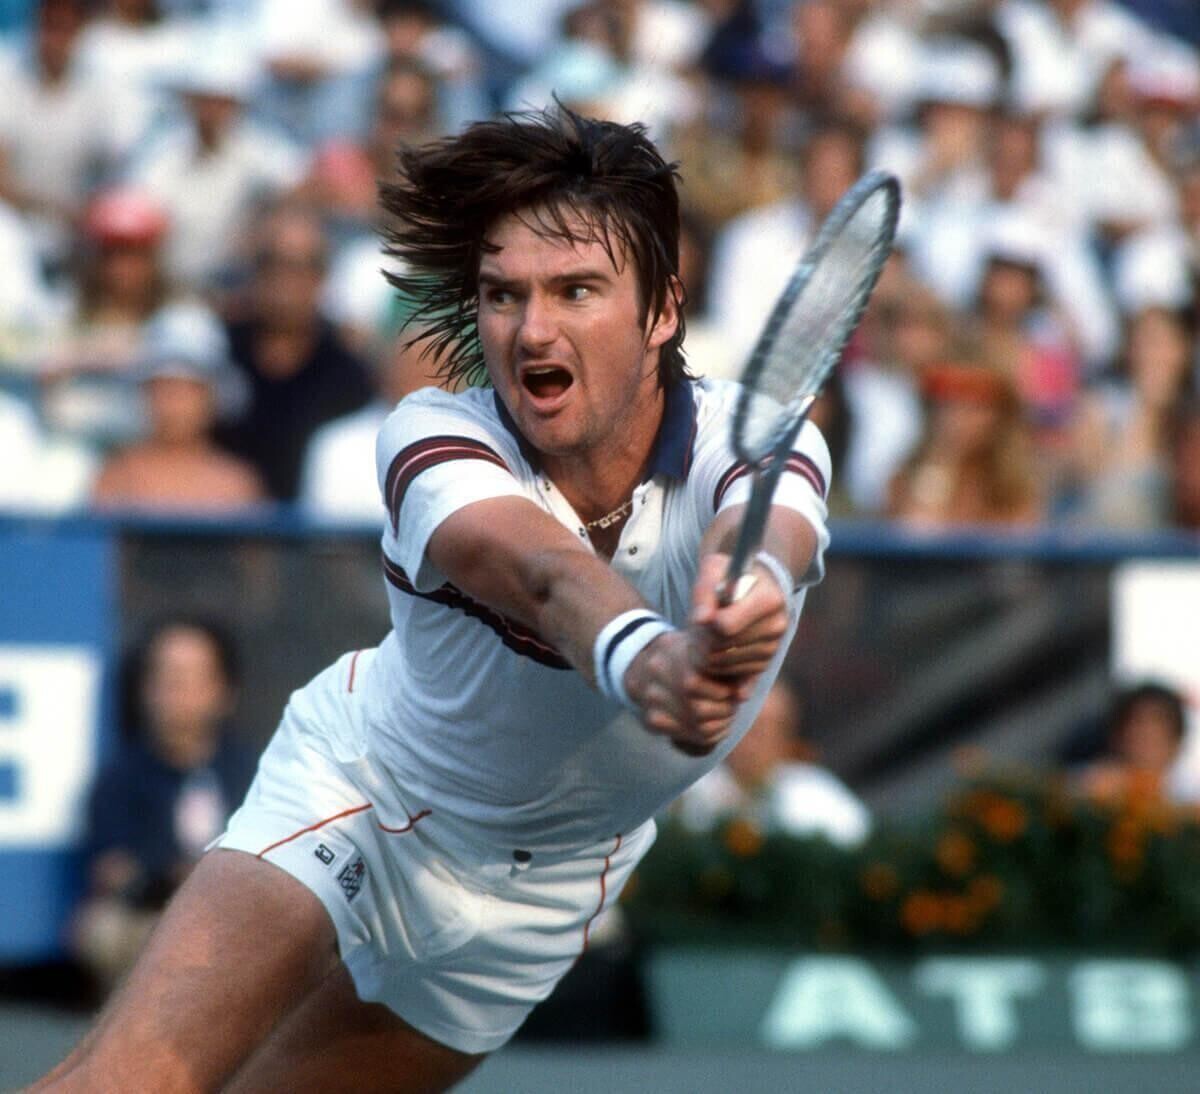 Jimmy Connors reaching for a backhand volley during the 1982 US Open at Flushing Meadows